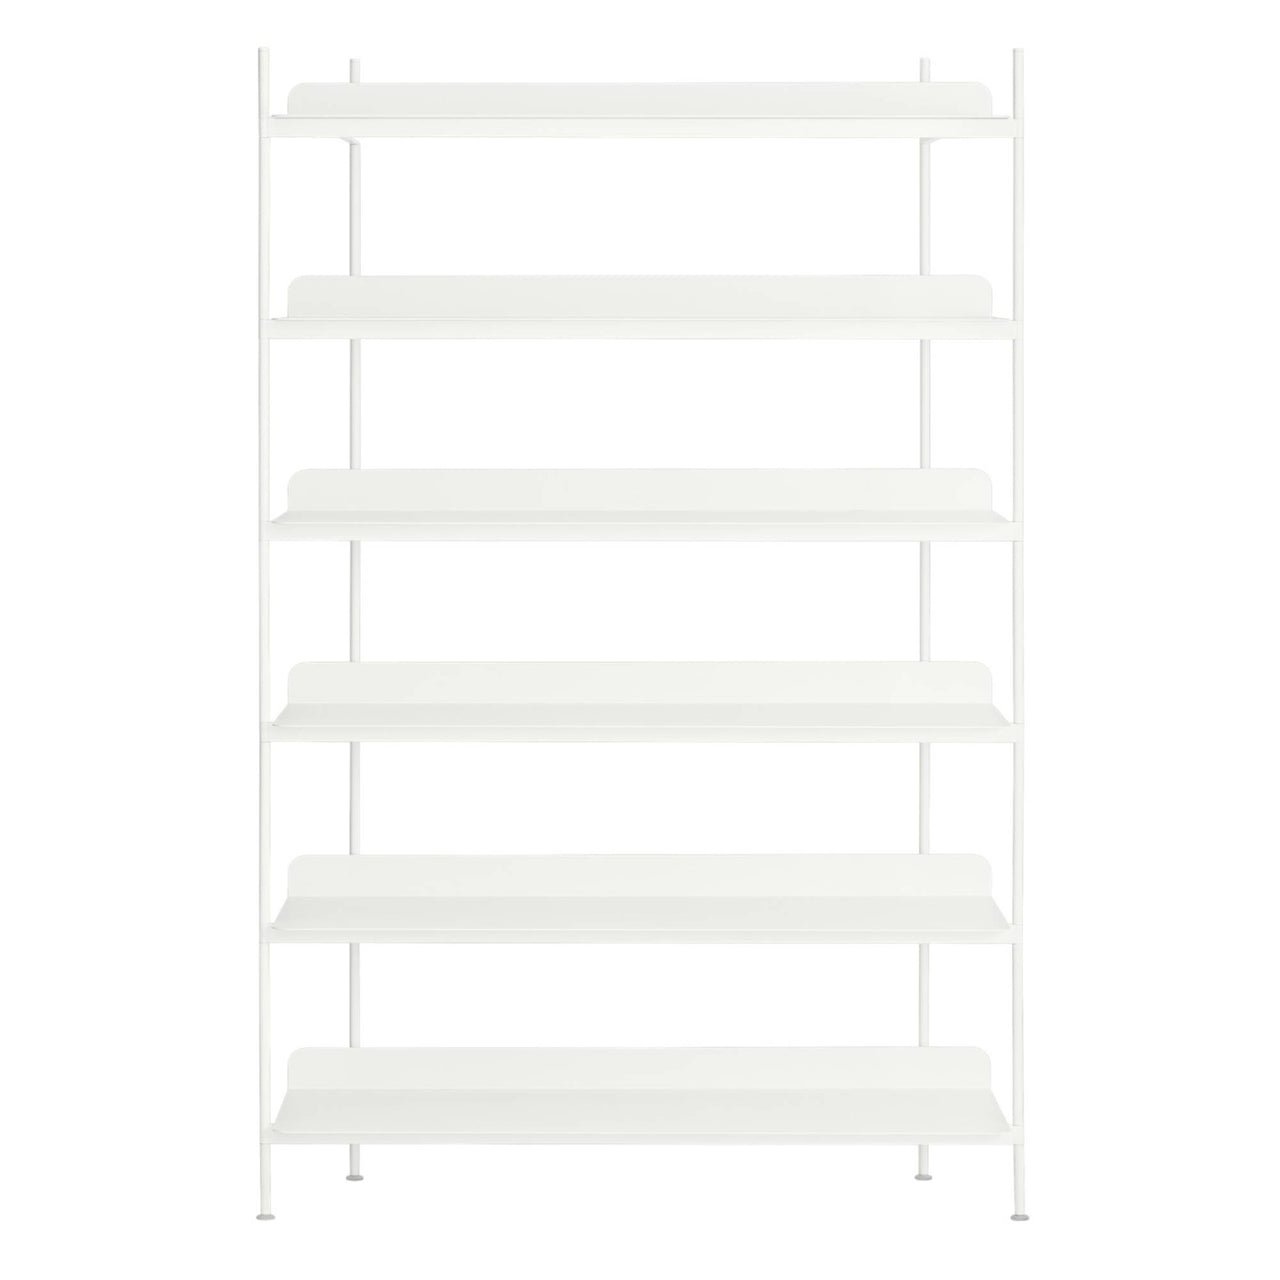 Compile Shelving System: Configuration 4 + White